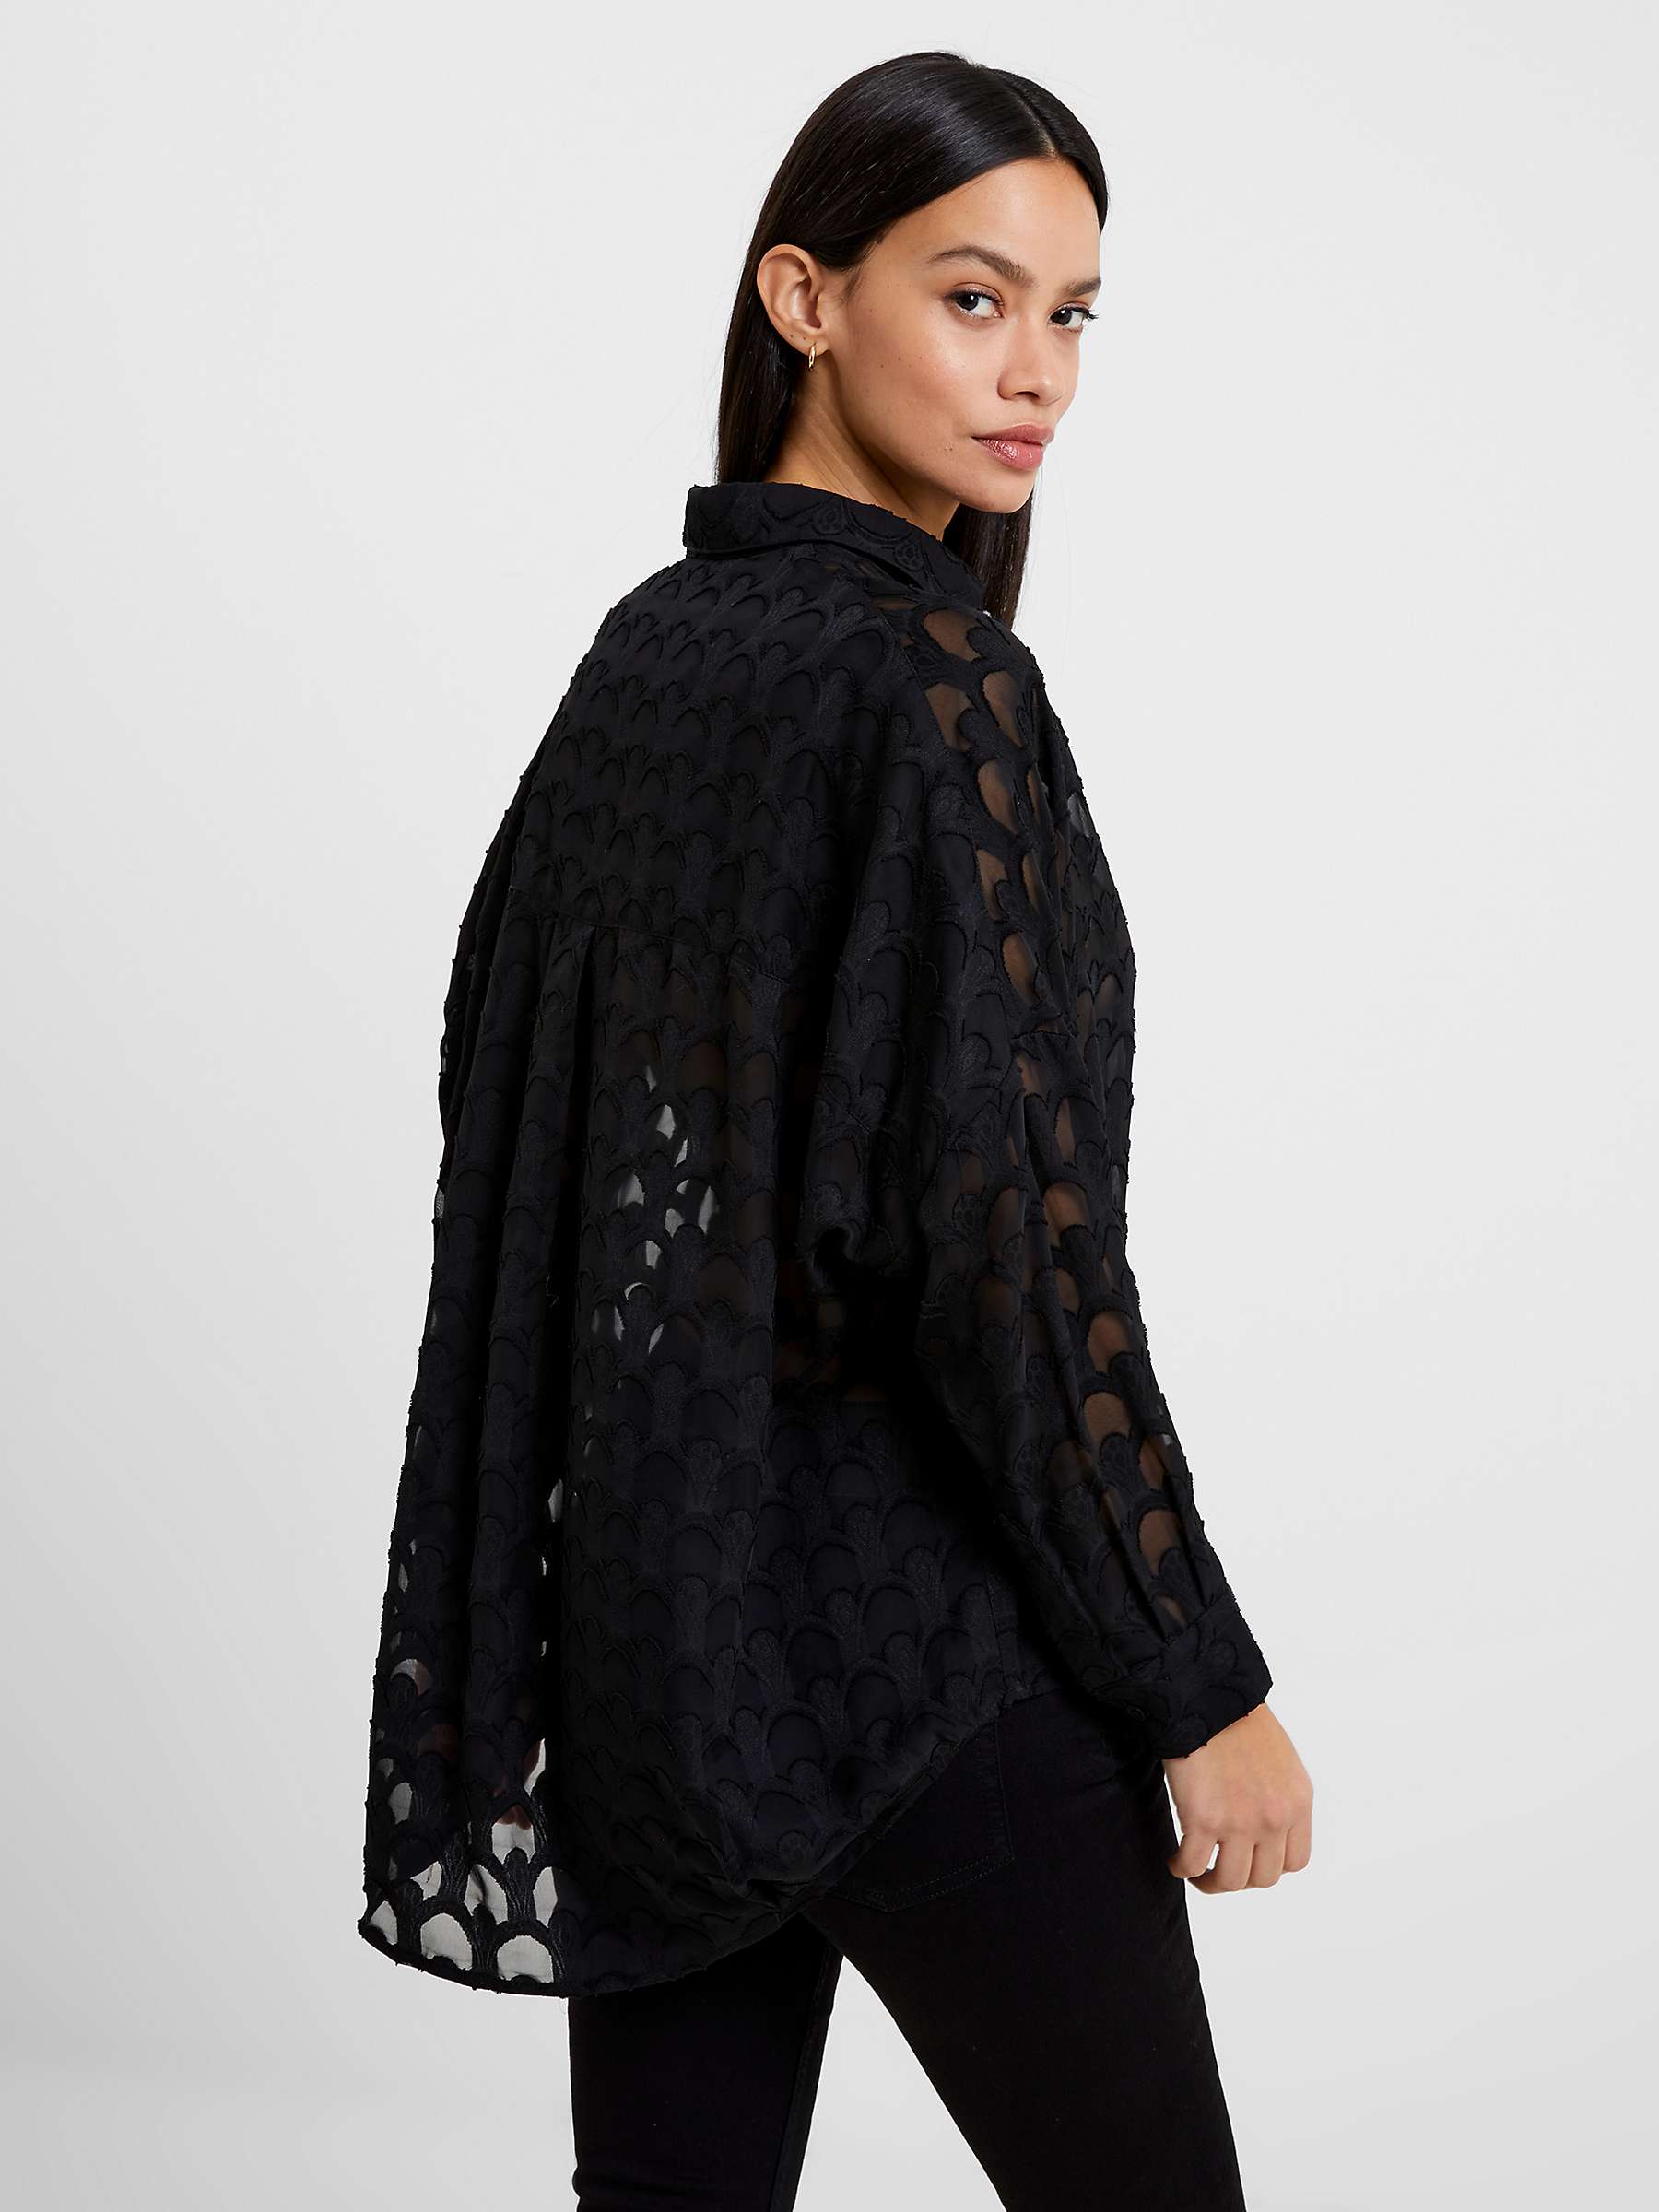 Buy French Connection Geometric Popover Shirt Online at johnlewis.com